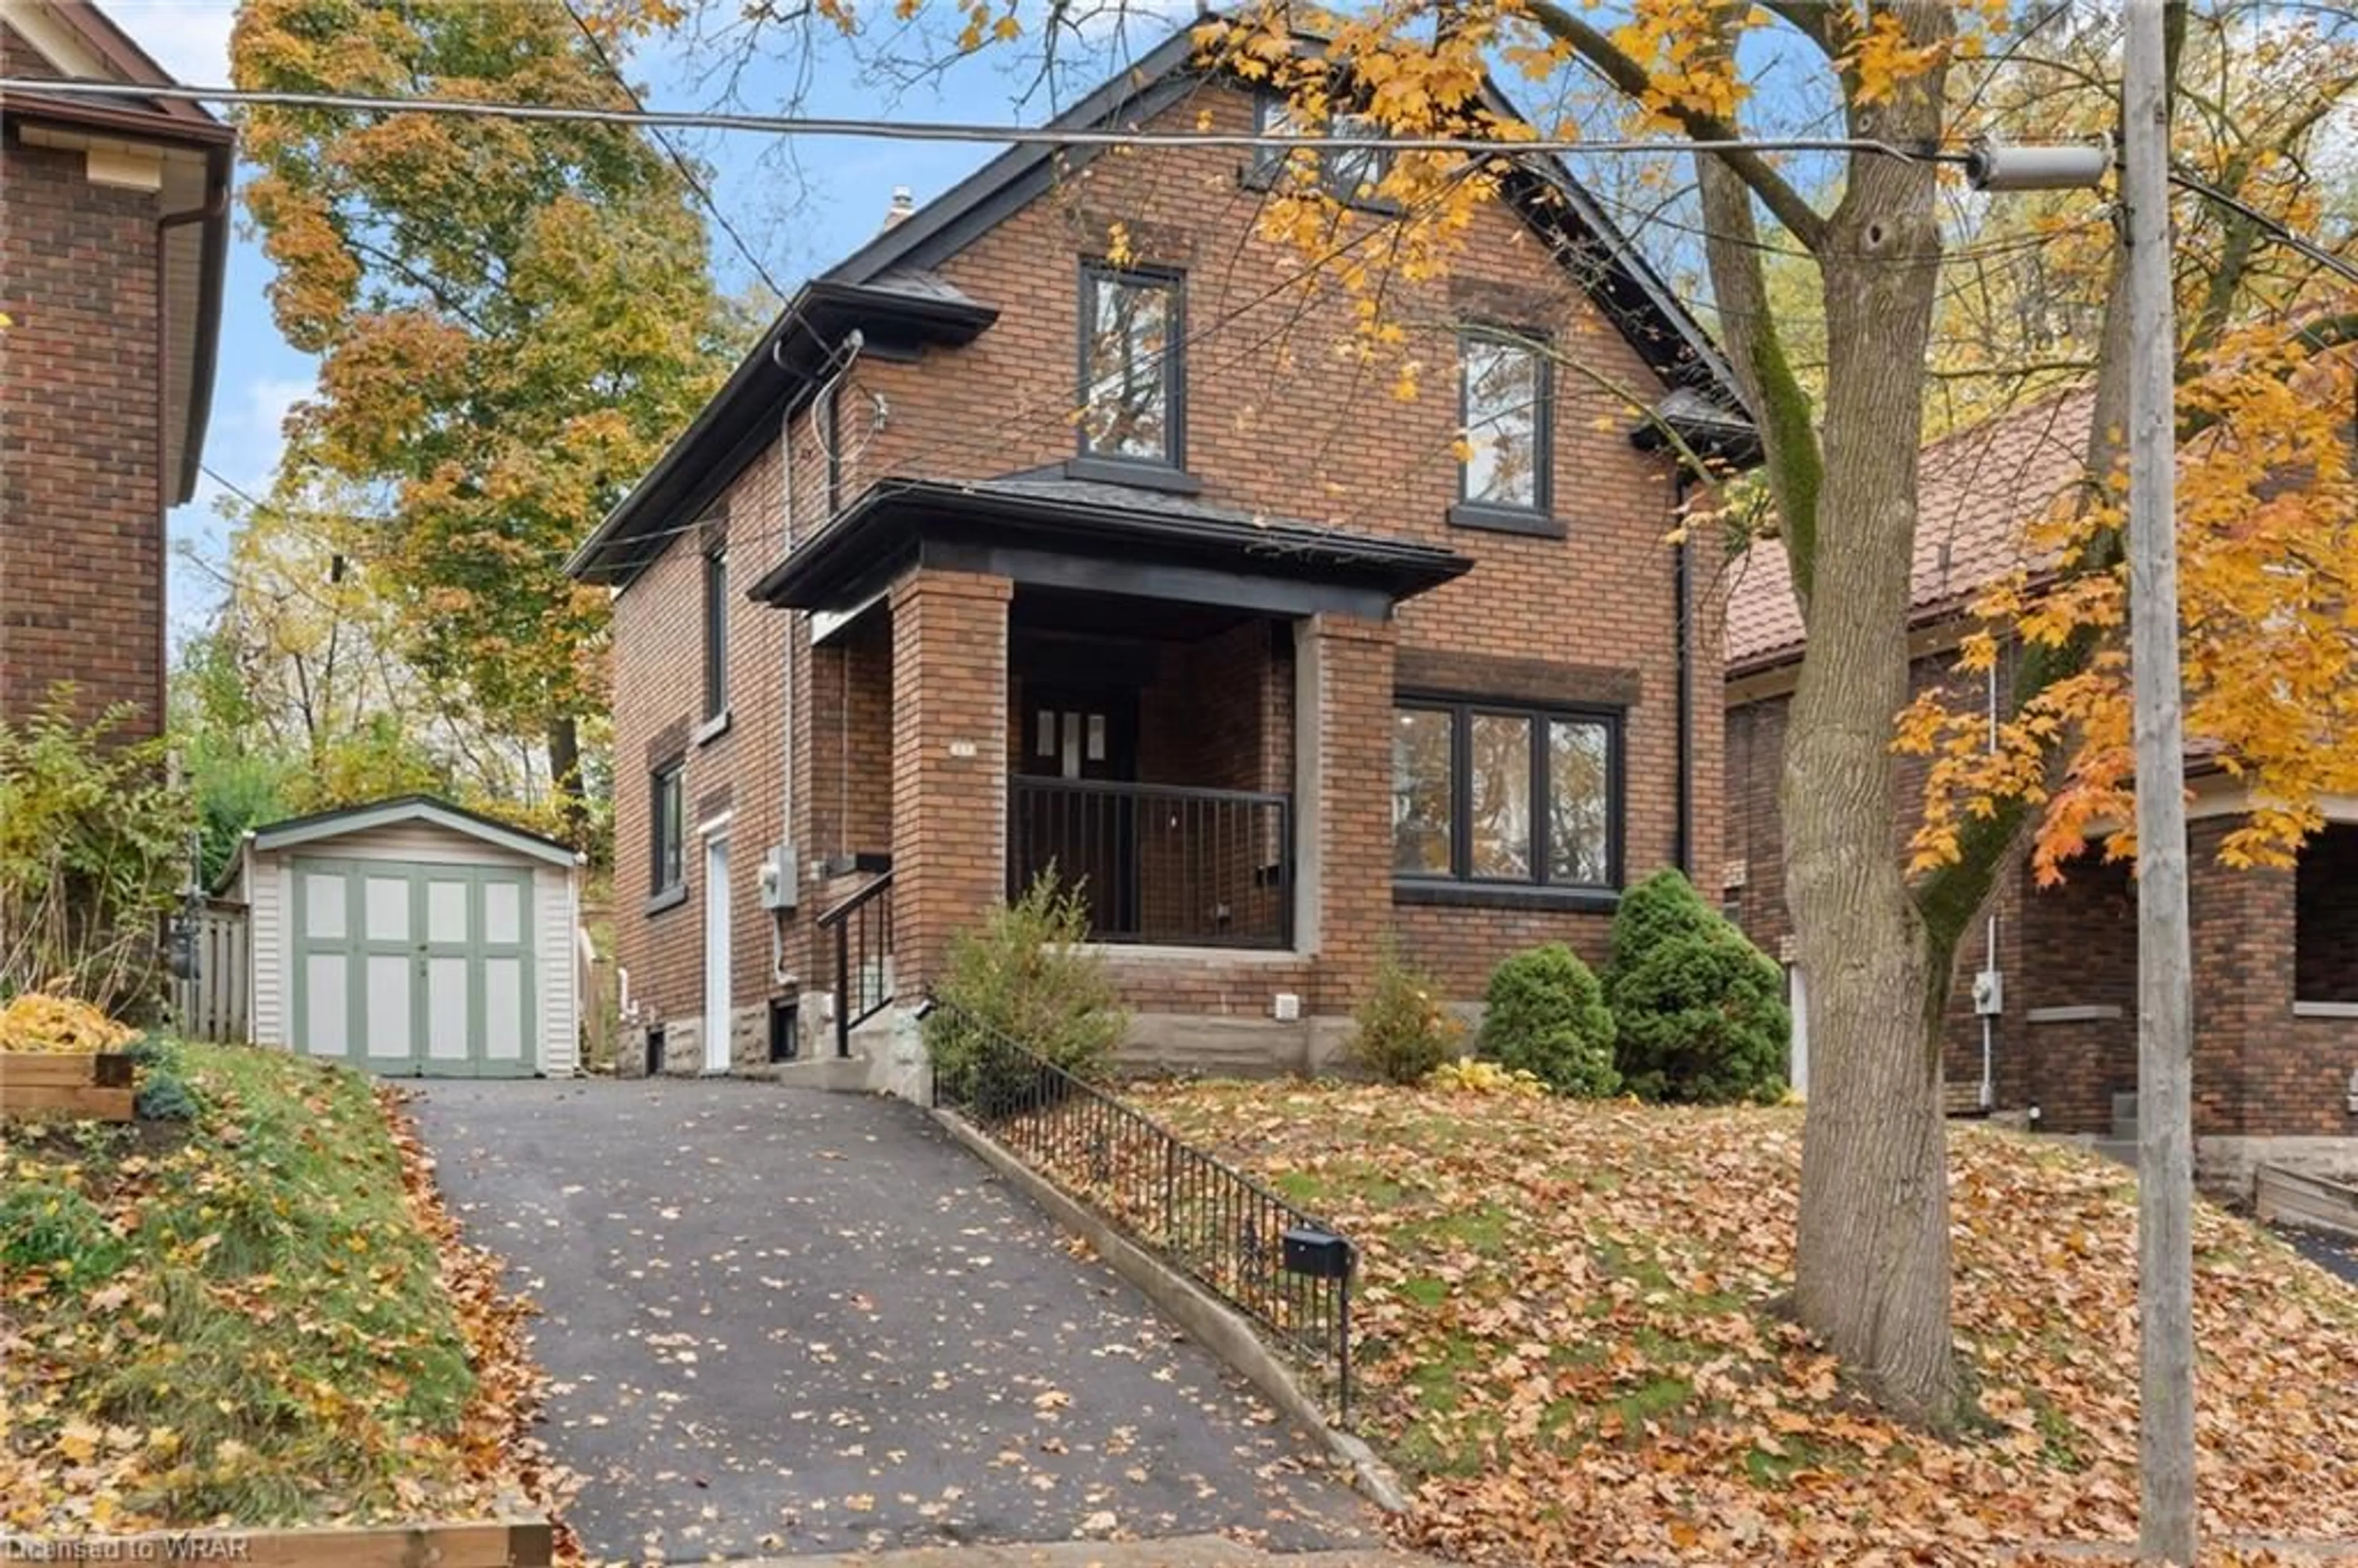 Home with brick exterior material for 27 Chestnut St, Kitchener Ontario N2H 1T6